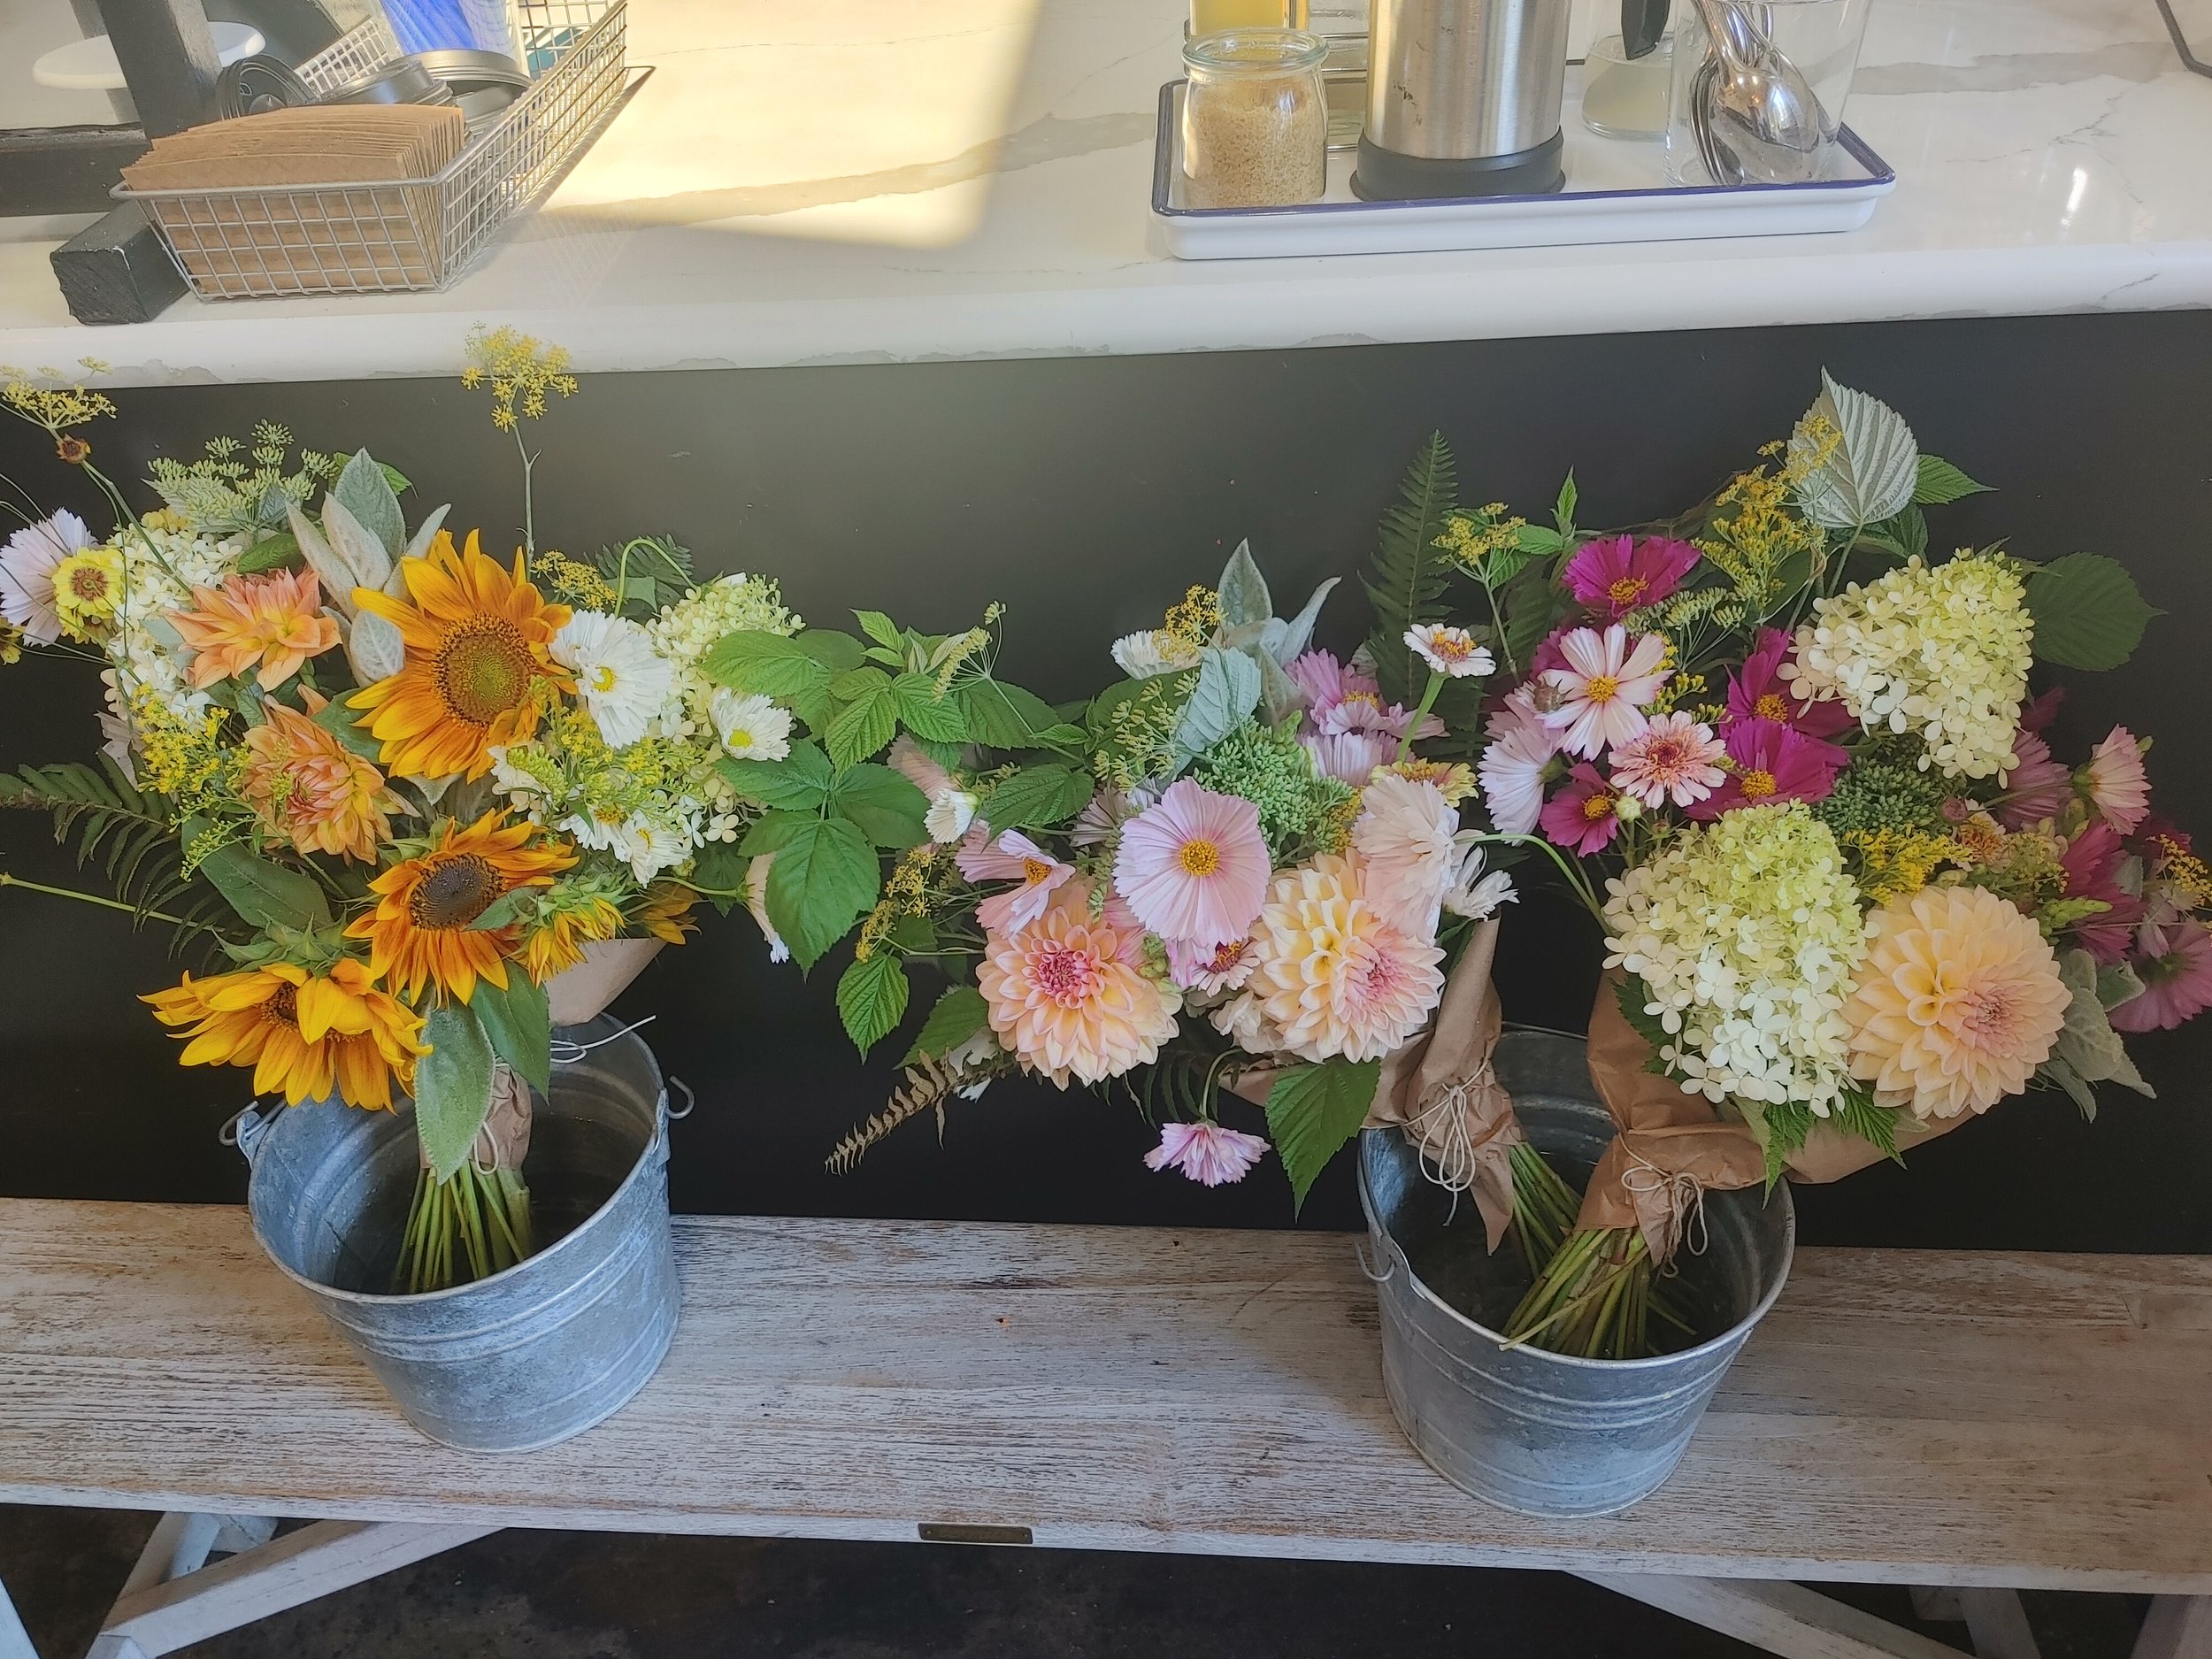  Nice flowers at the brunch place 